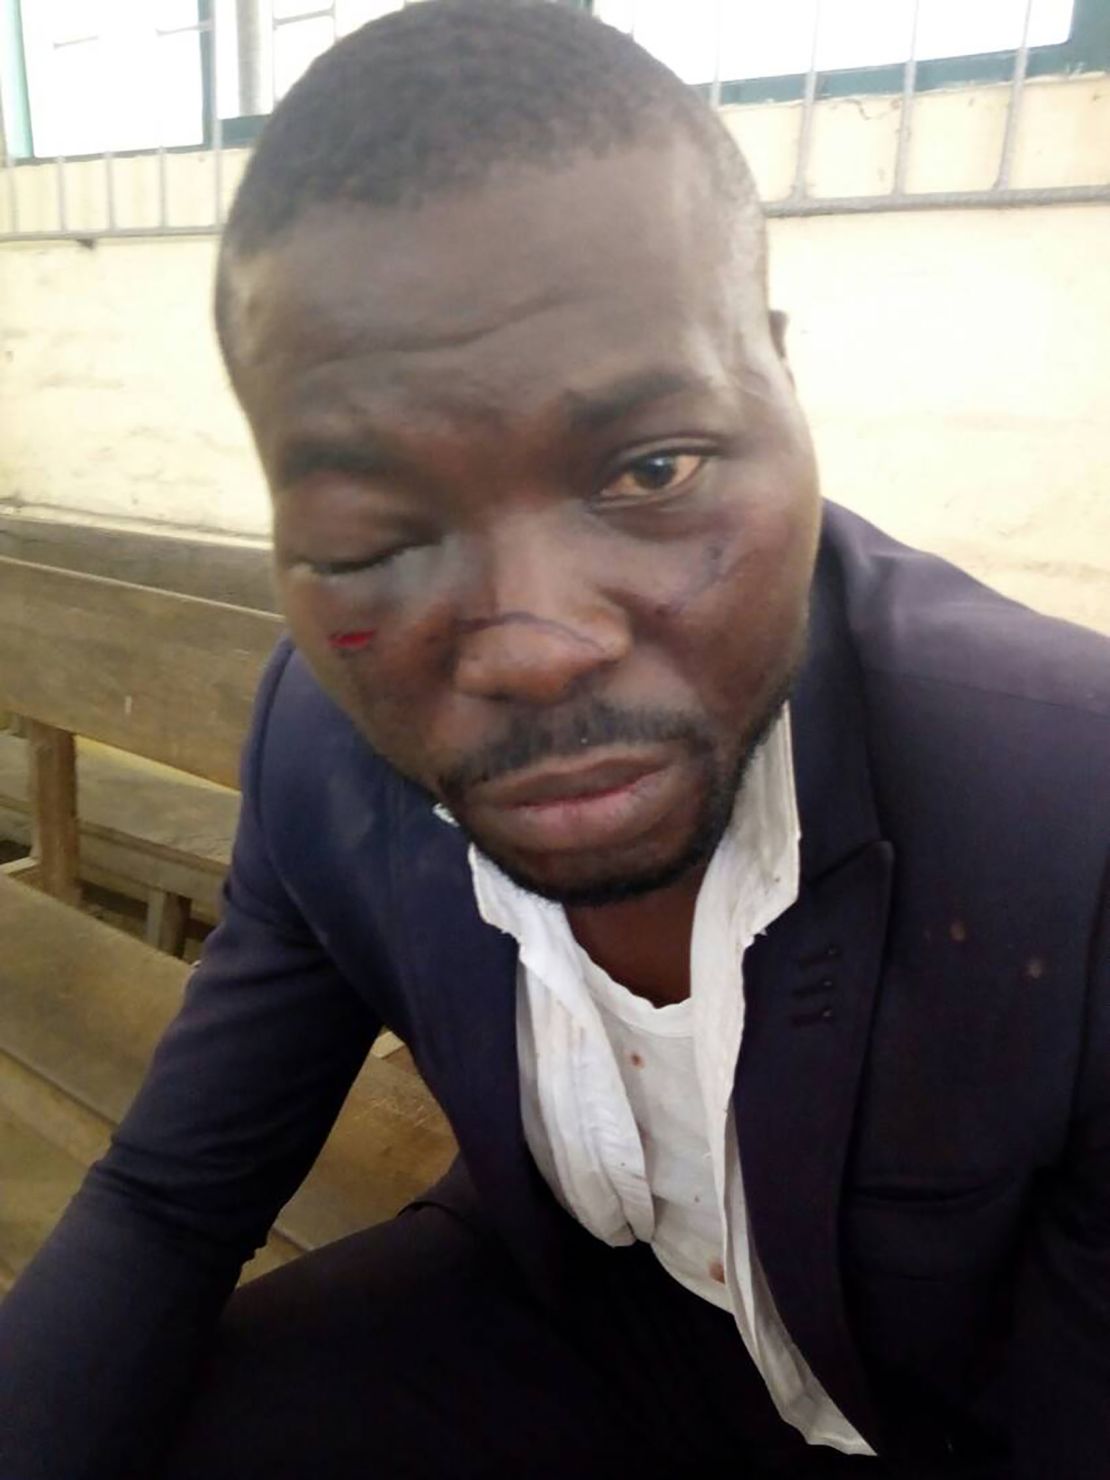 Oyabevwe alleged he was beaten by police officers.